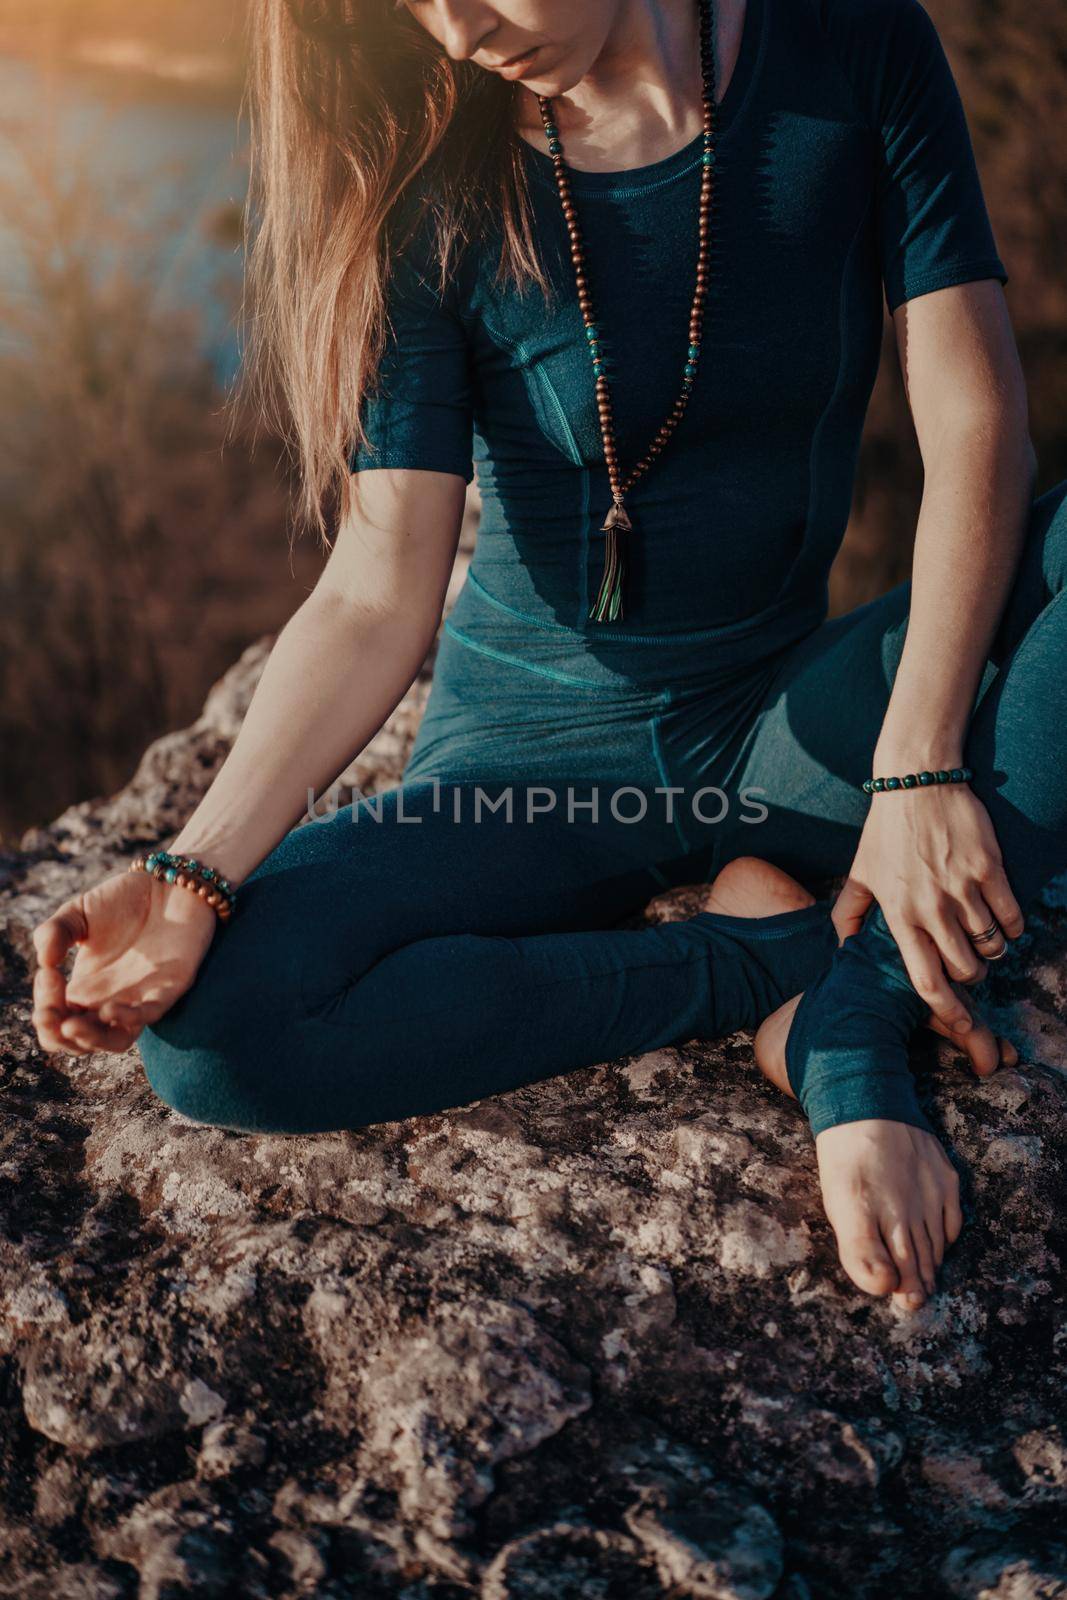 Yogi woman sitting in mala beads with gyan mudra, meditating, feeling free in front of wild nature. Mindful fitness coach having zen moment. Everyday yoga practice, calm breath, concentration by kristina_kokhanova